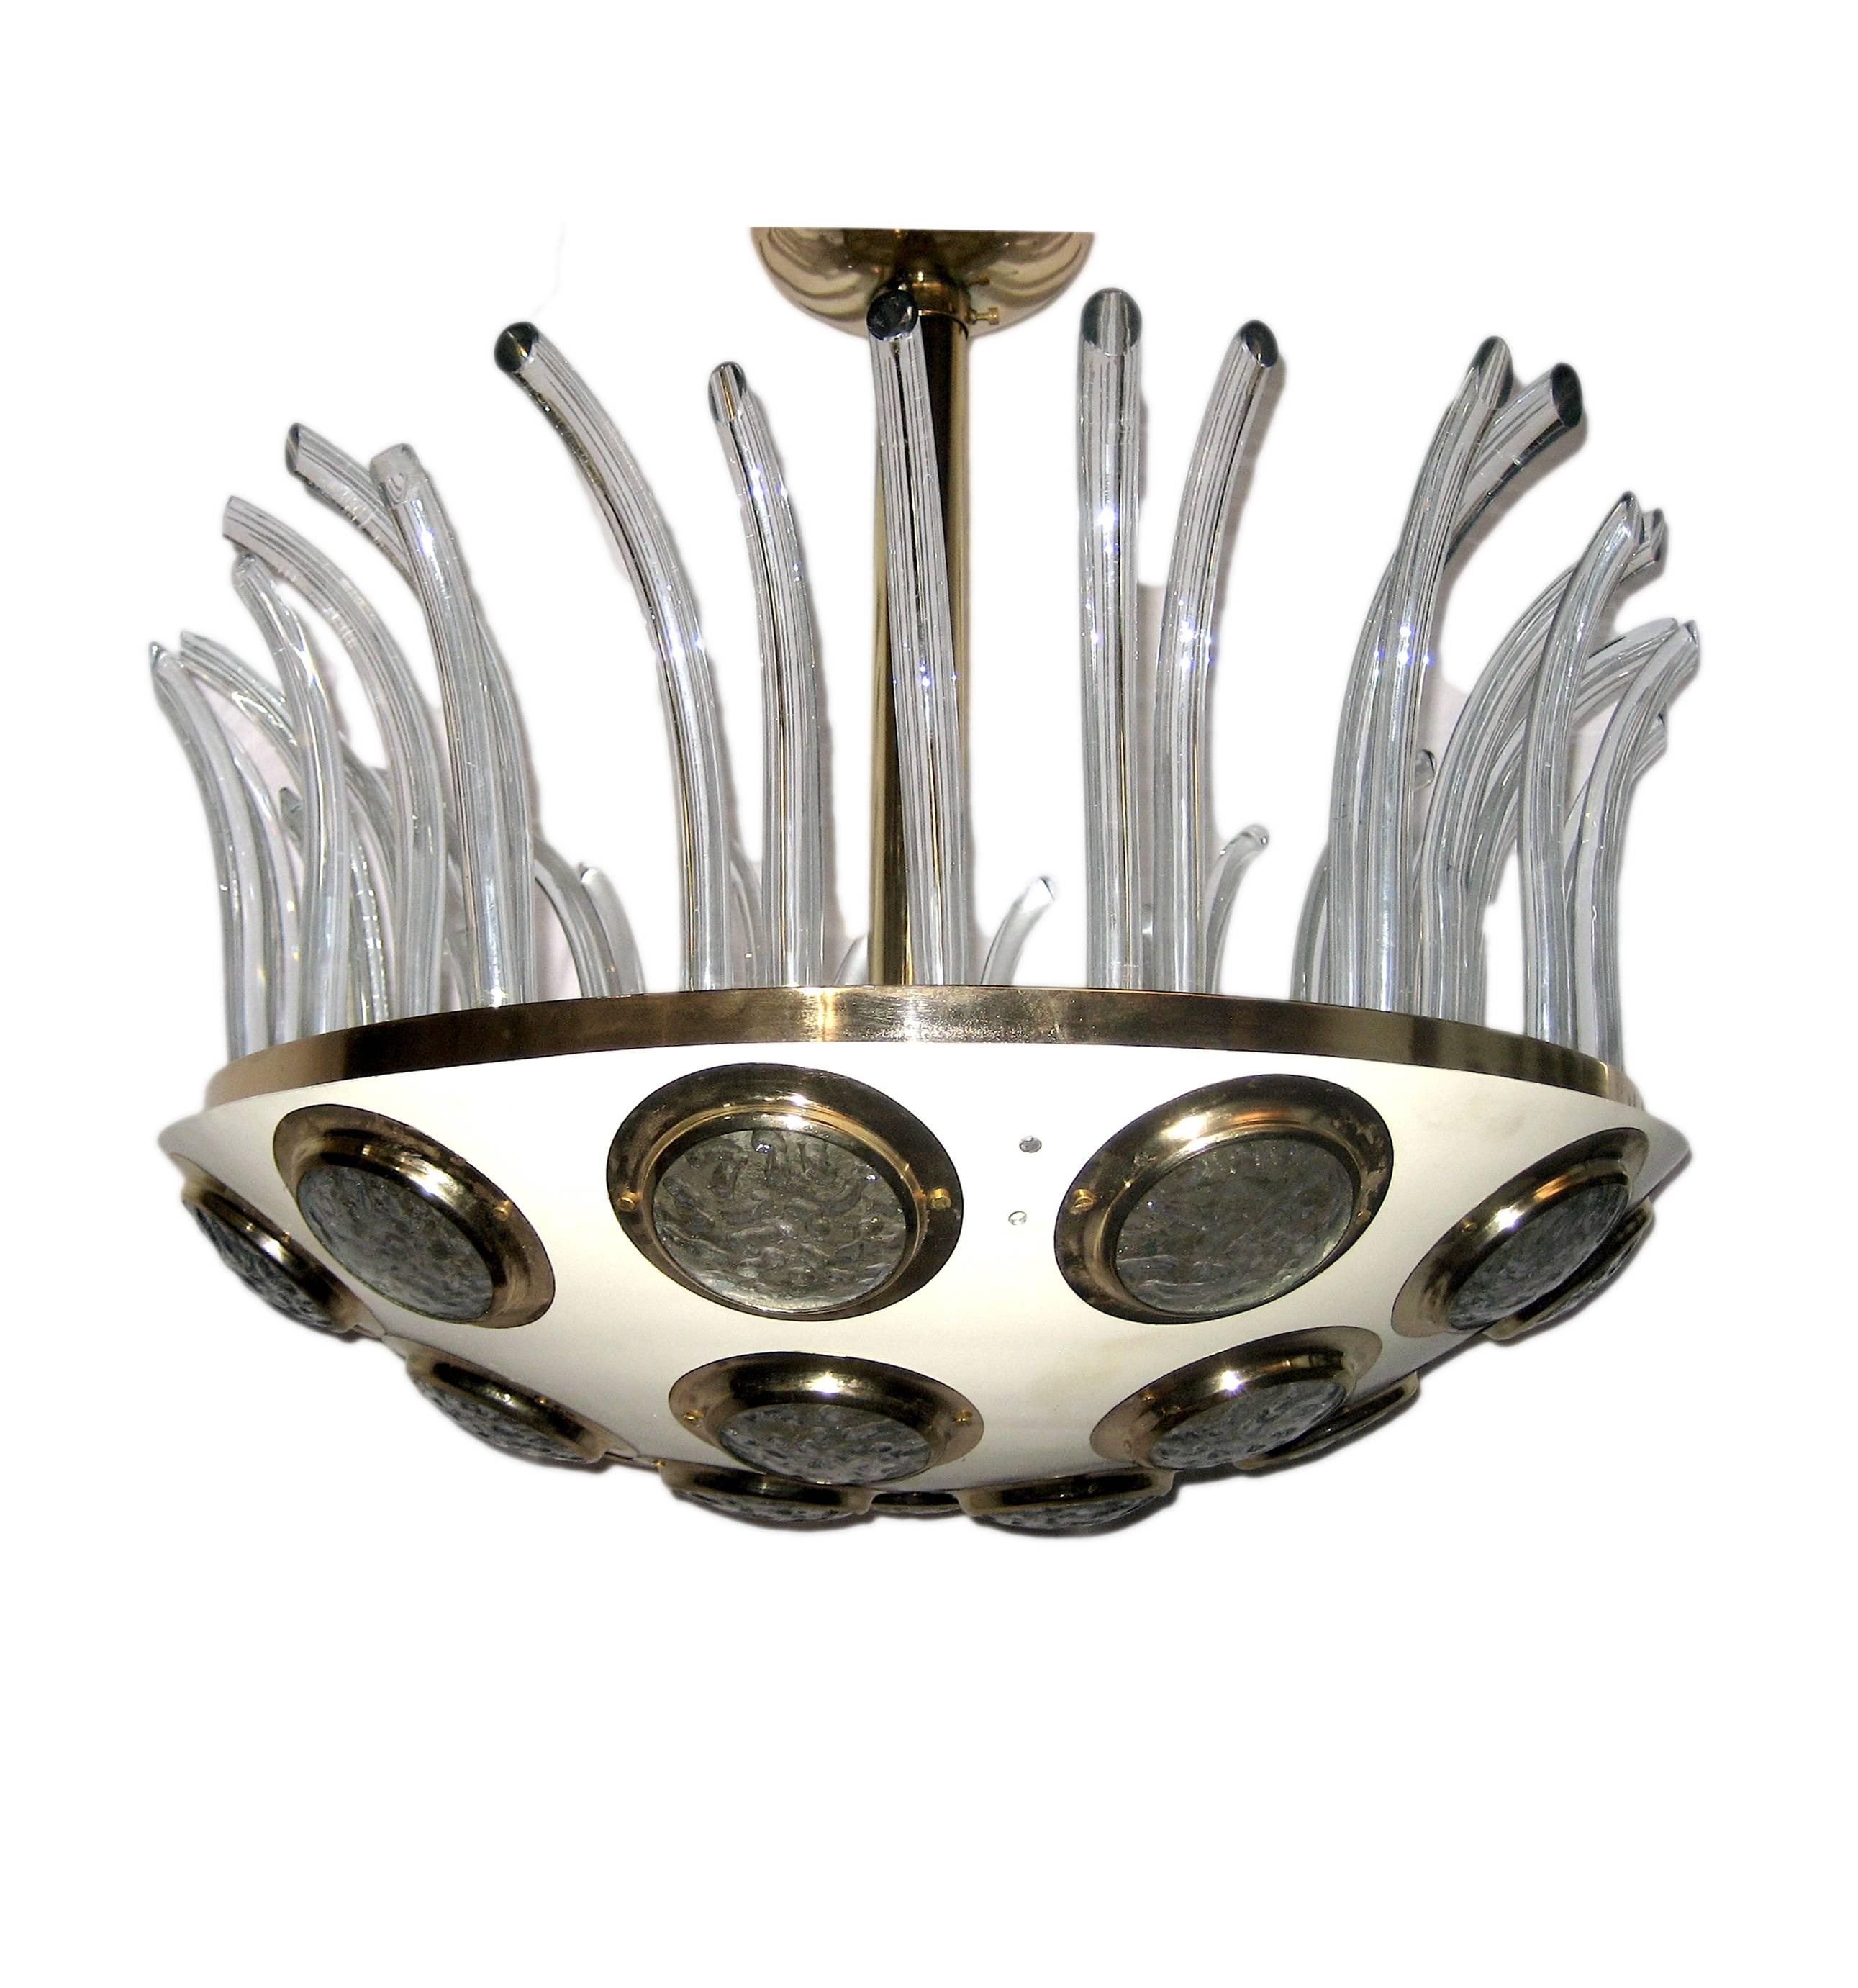 Gilt Moderne Italian Light Fixture with Glass Insets For Sale